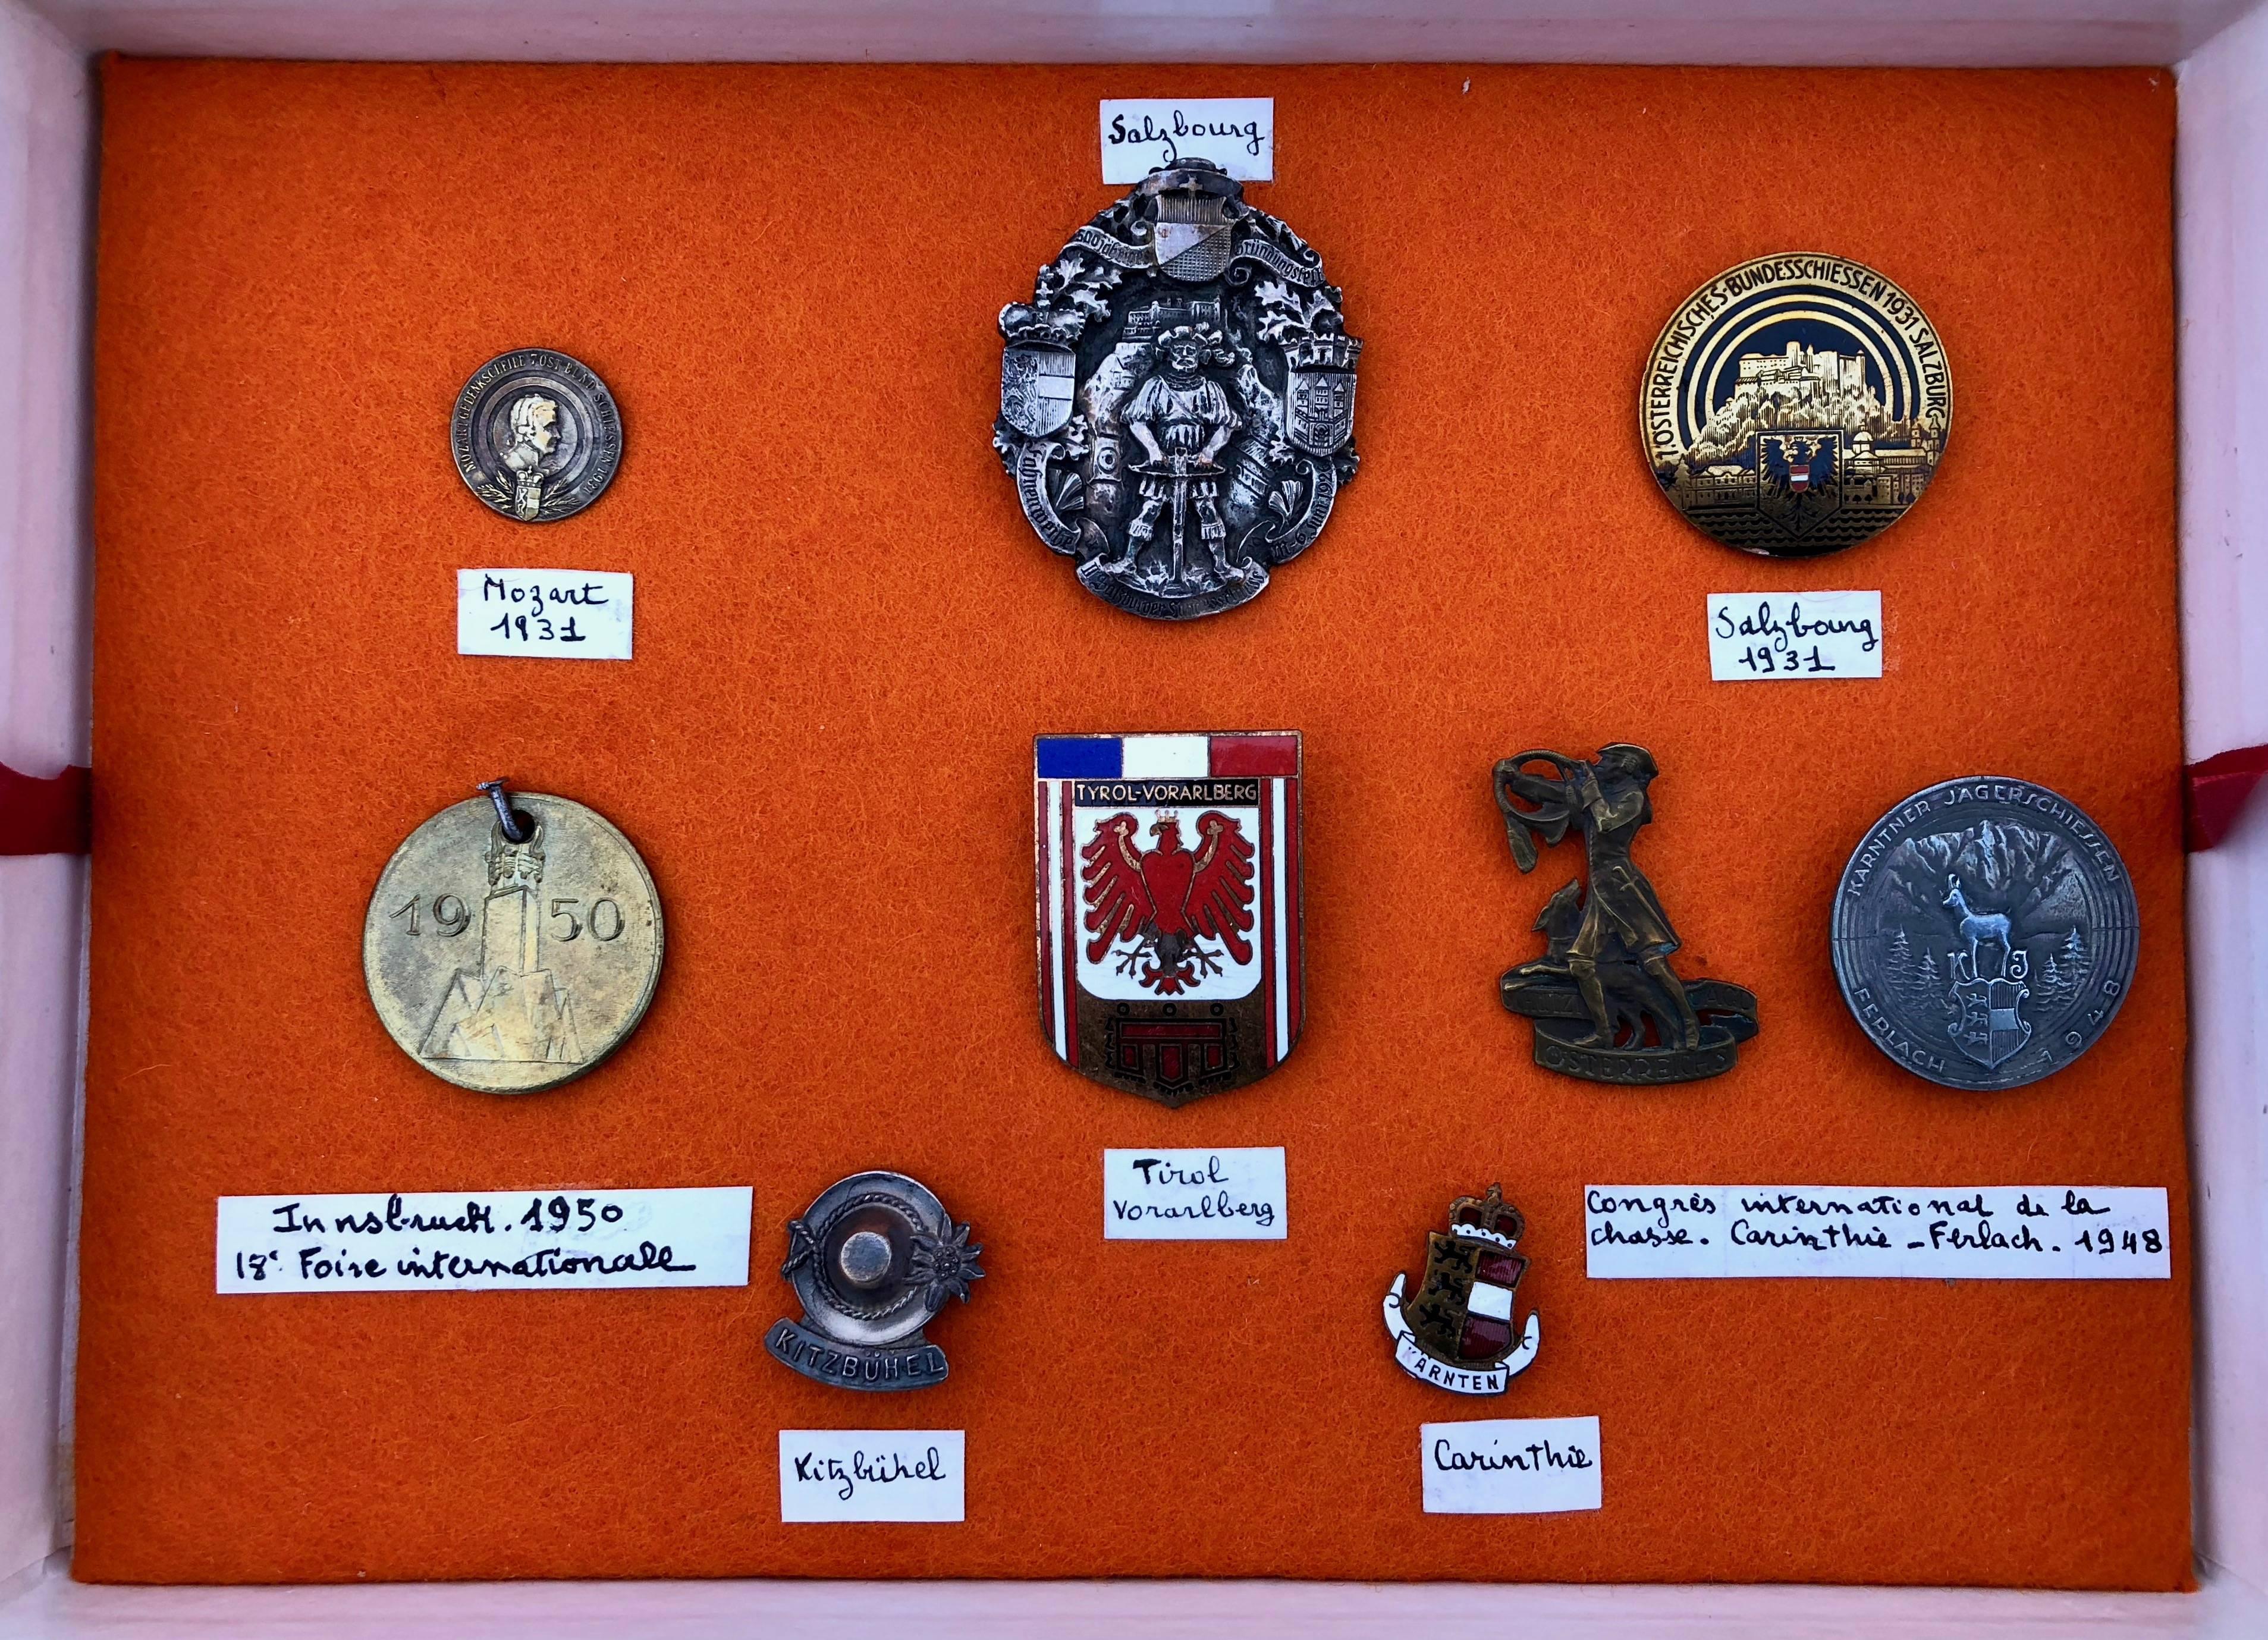 This is a unique set of nine Austrian commemorative medals in a display box with orange background, black box exterior with green trim, interior lift taps and French block writing 